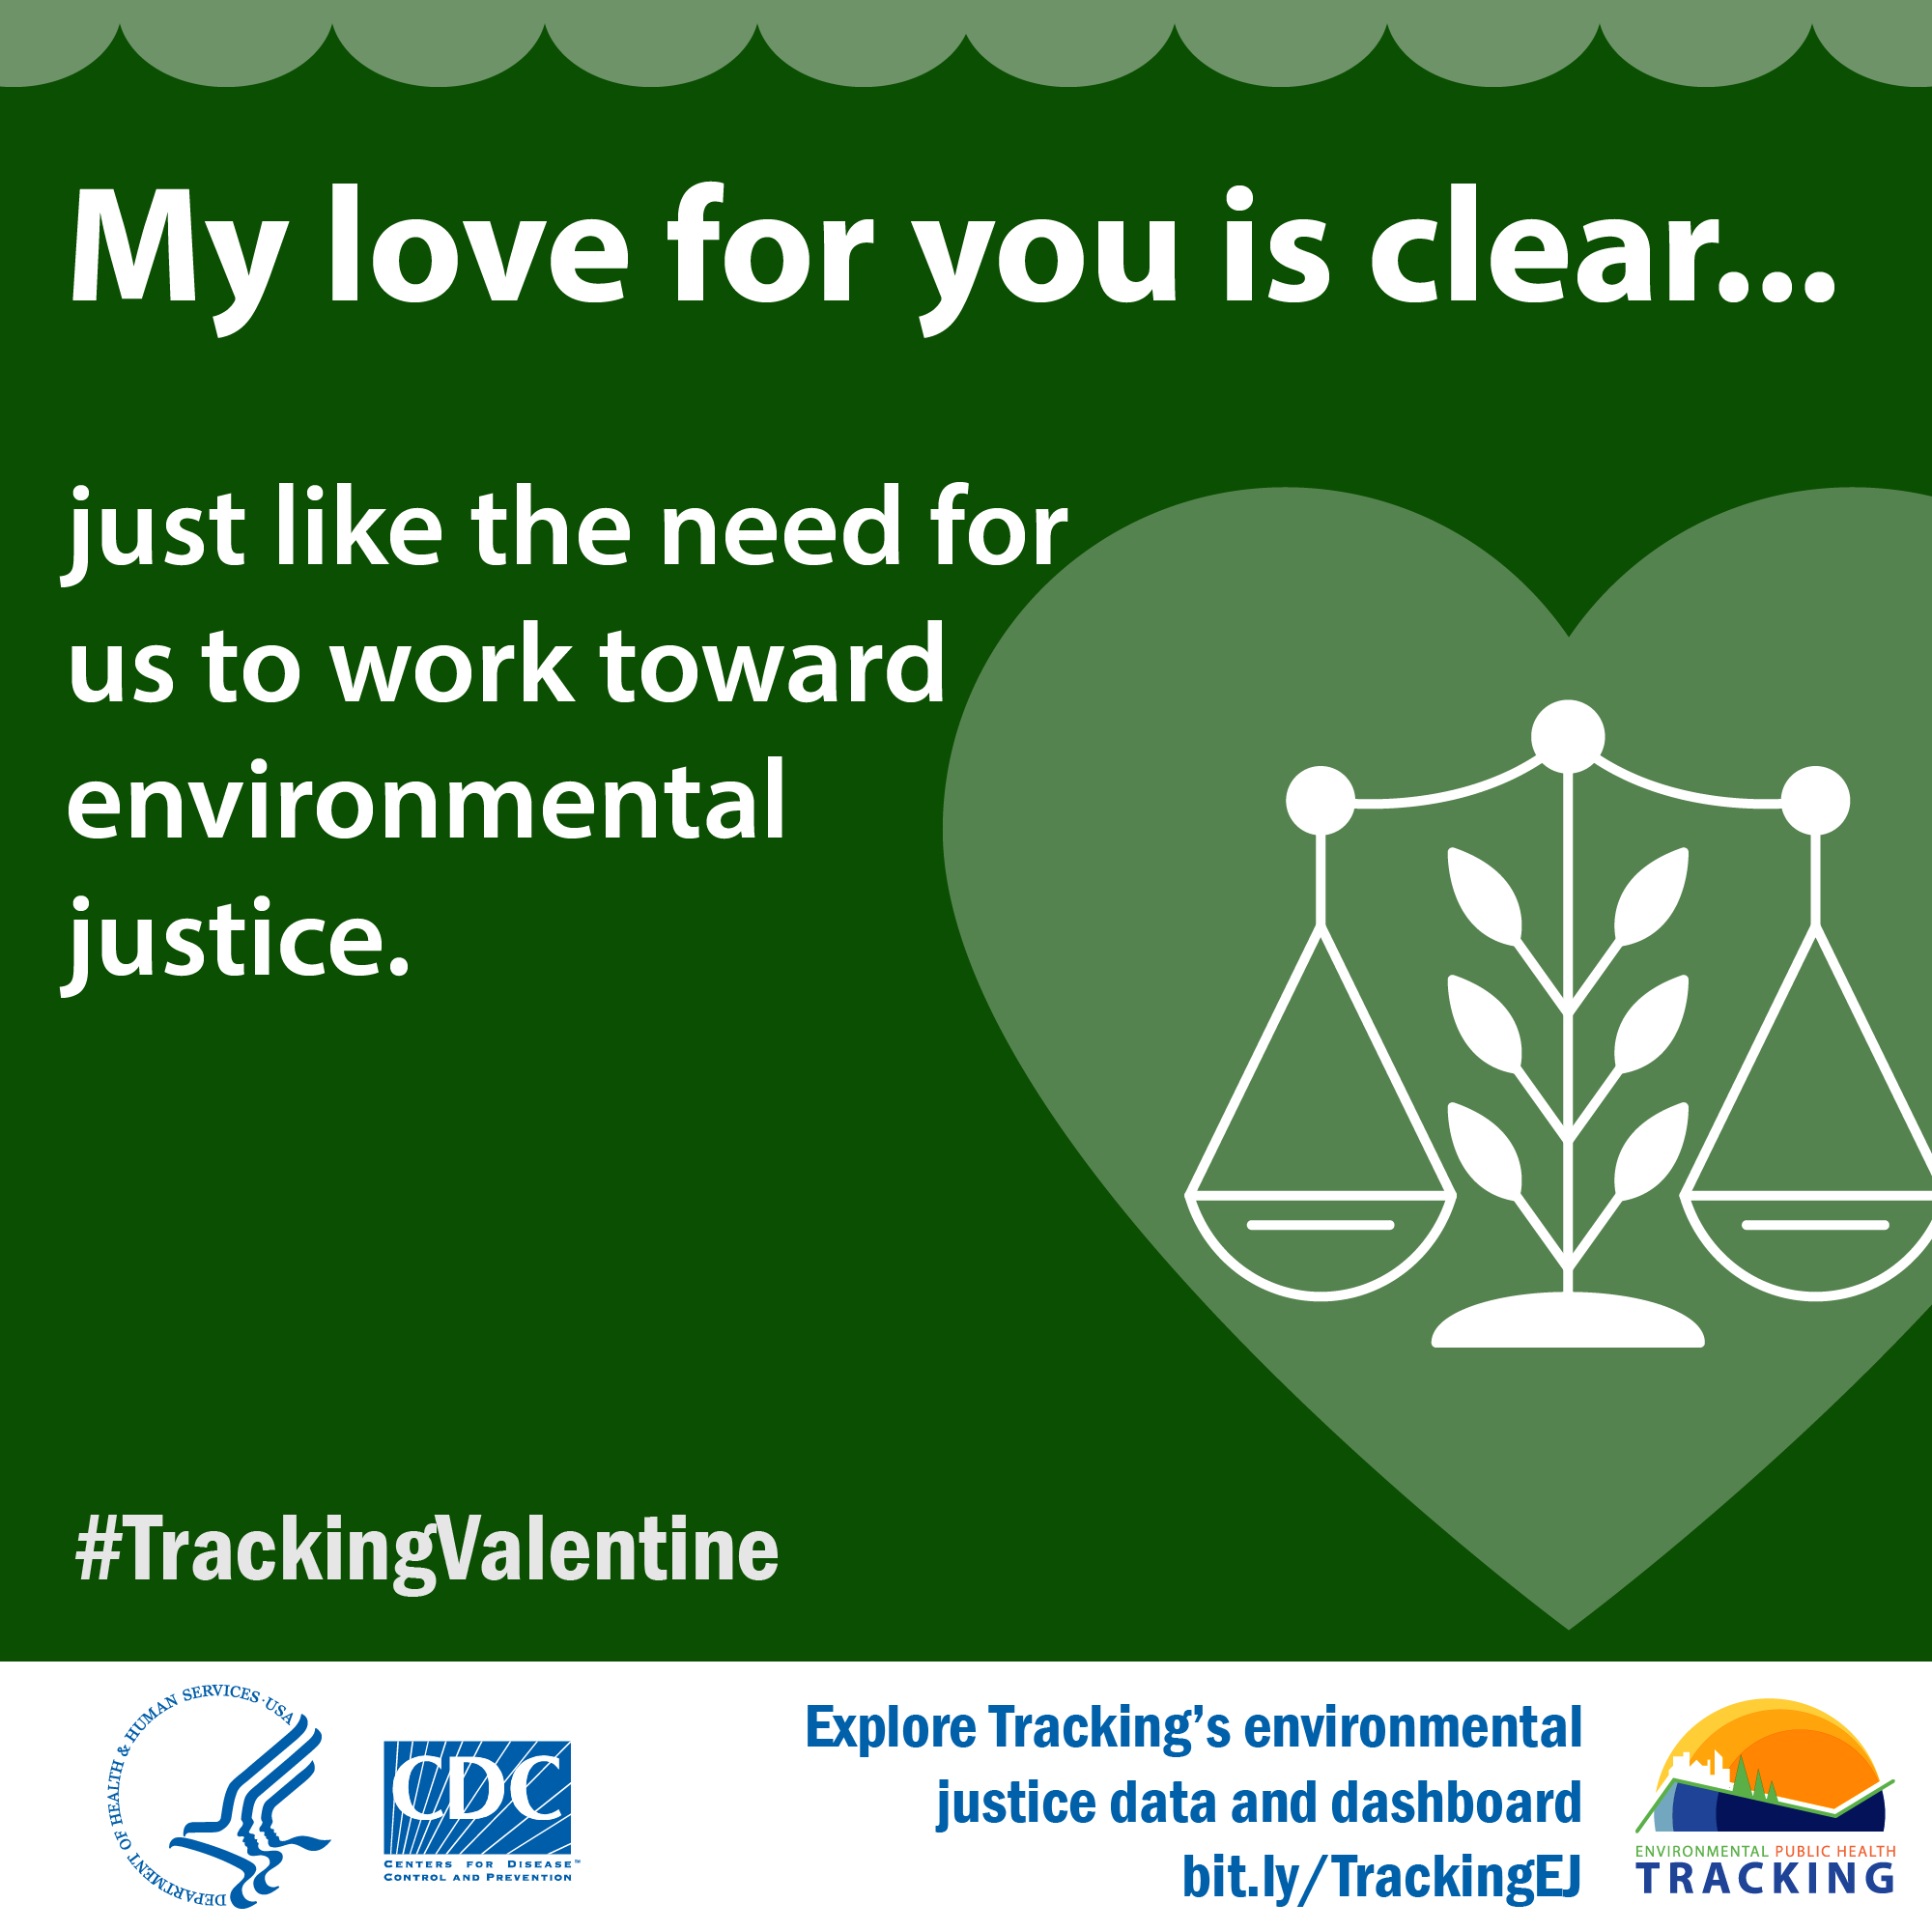 Scale icon & green heart with text: "My love for you is clear...just like the need for us to work toward environmental justice."